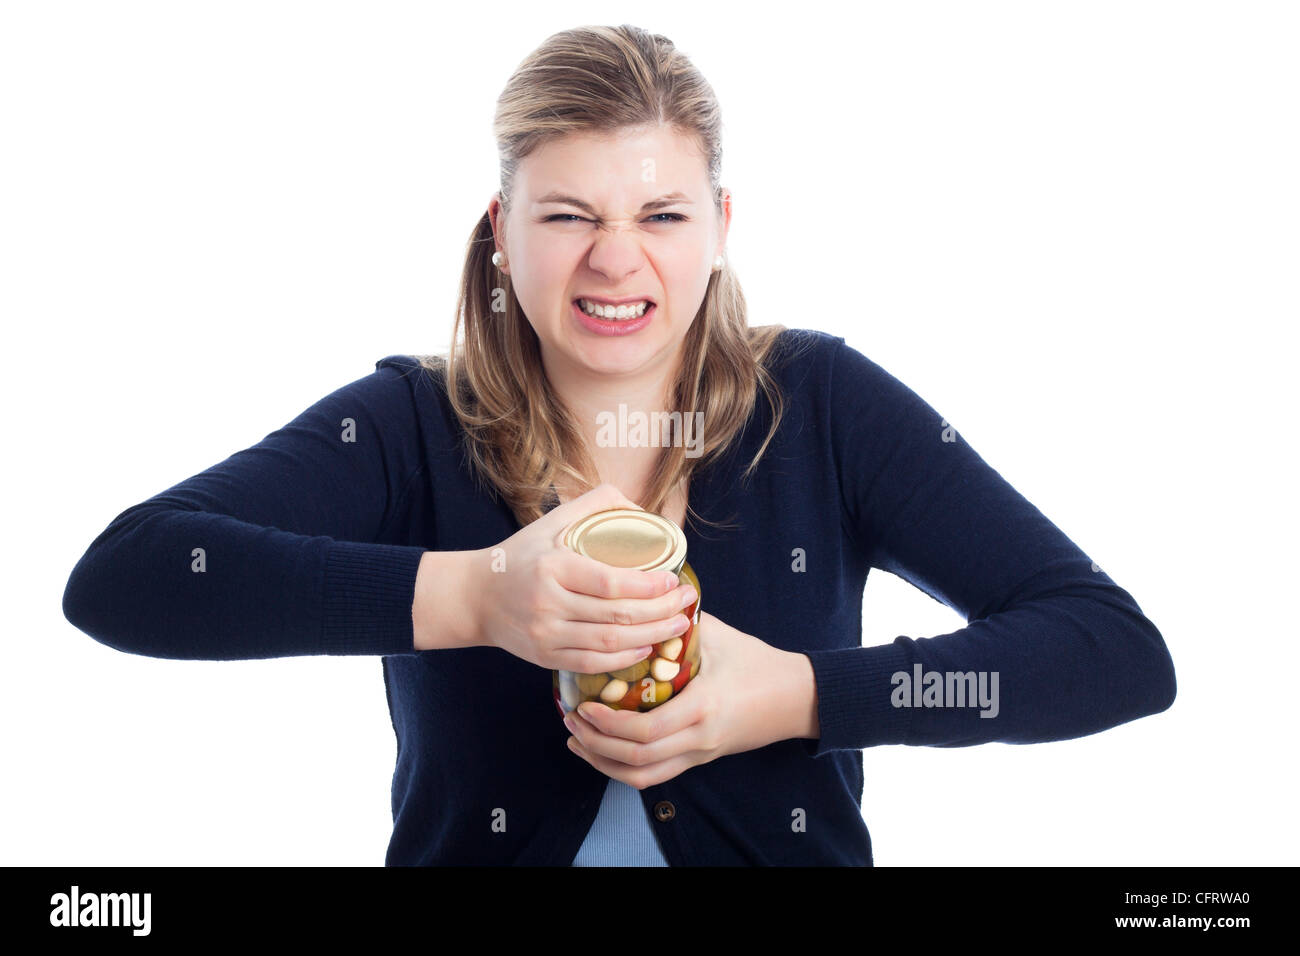 Young woman struggling to open bottle, isolated on white background. Stock Photo